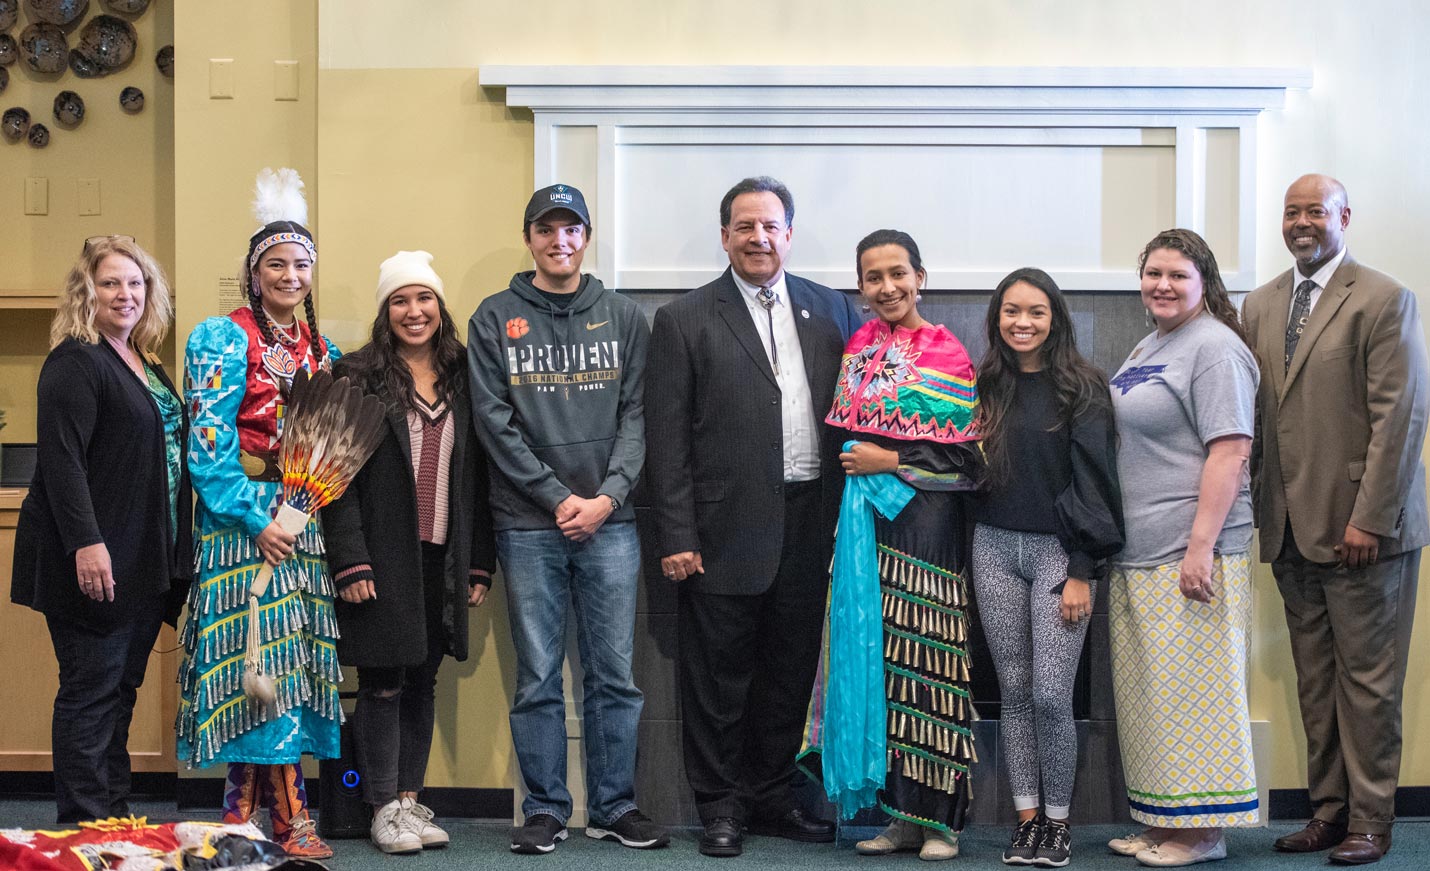 A group photograph of nine people at a Native American Heritage celebration. Two women are in colorful Native American attire. the man in the middle is wearing a bolo tie with his suit.